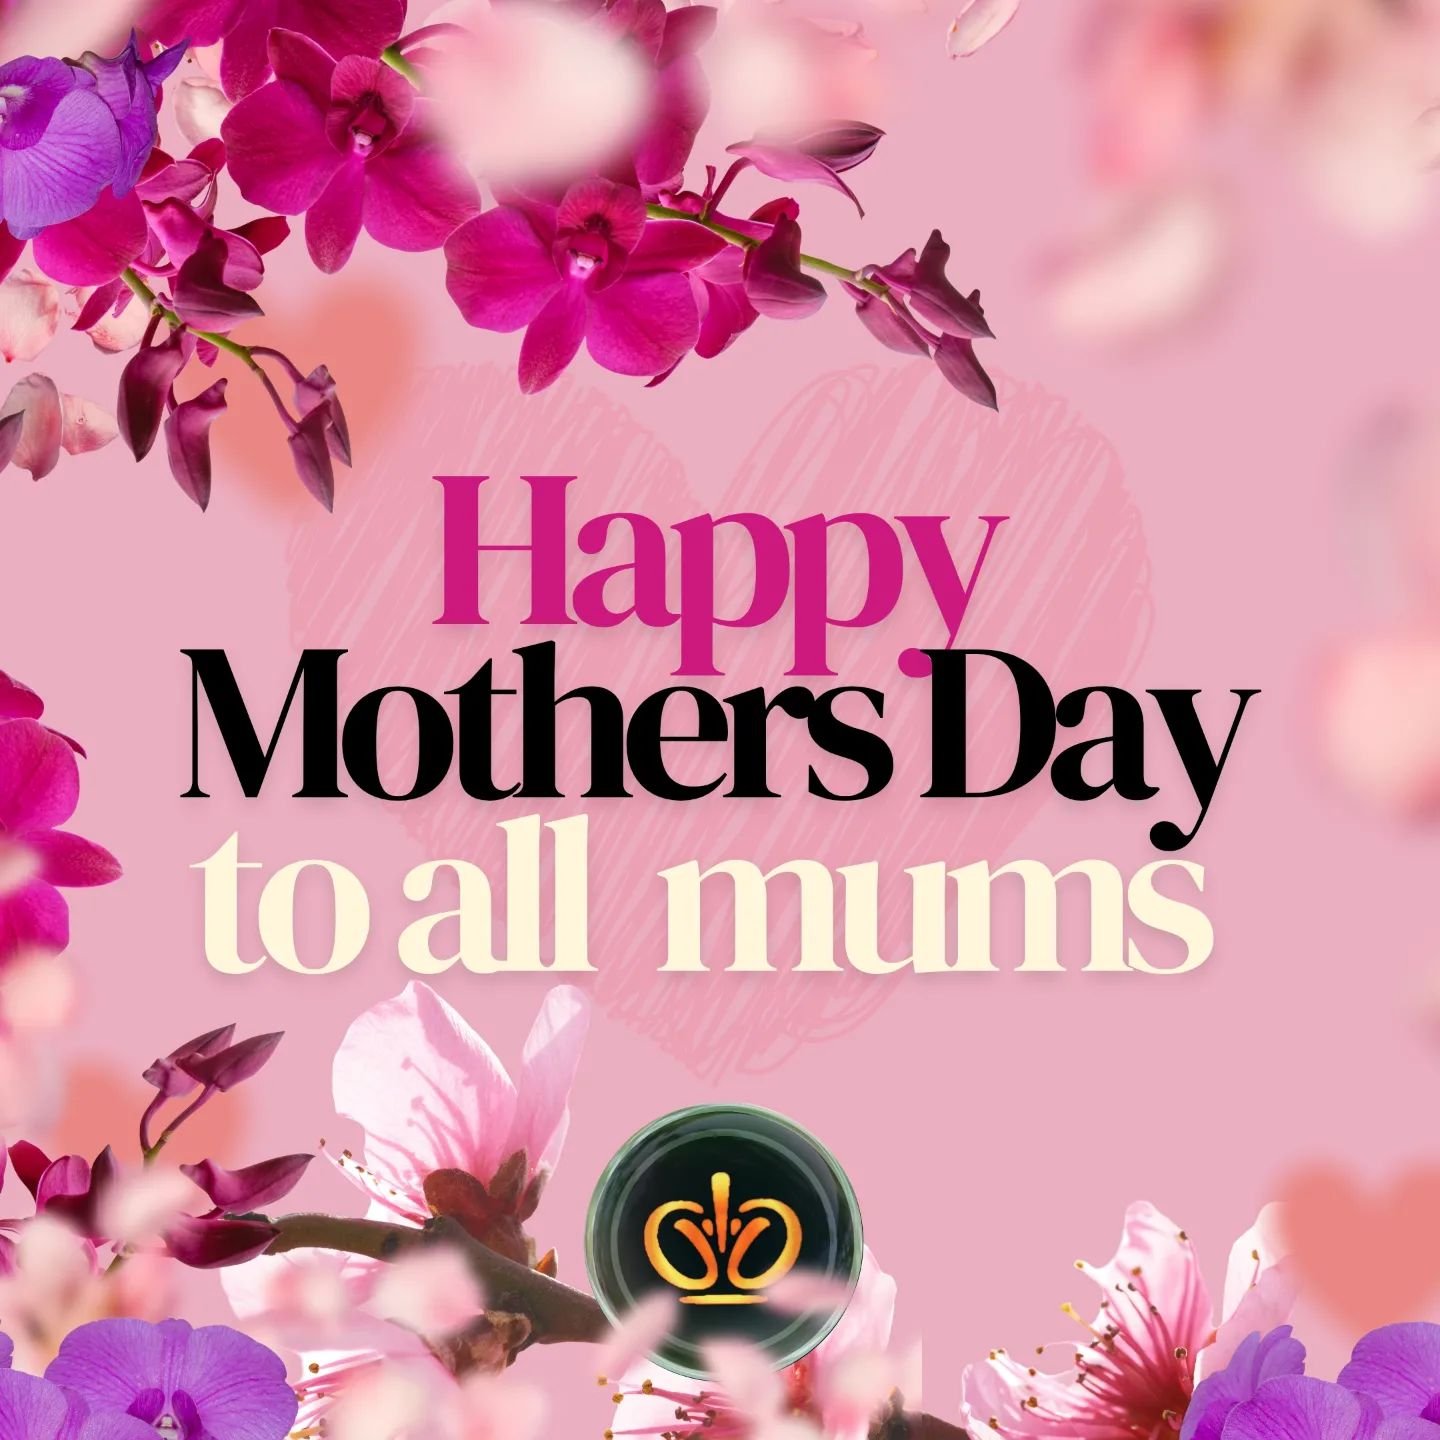 💖 Happy Mother's Day to all the incredible mums out there!

You deserve a day of pure pampering and relaxation. &zwj;♀️

We at Empire Day Spa celebrate the unwavering love and strength of mothers. ❤️

Tag a mum who deserves a spa day in the comments